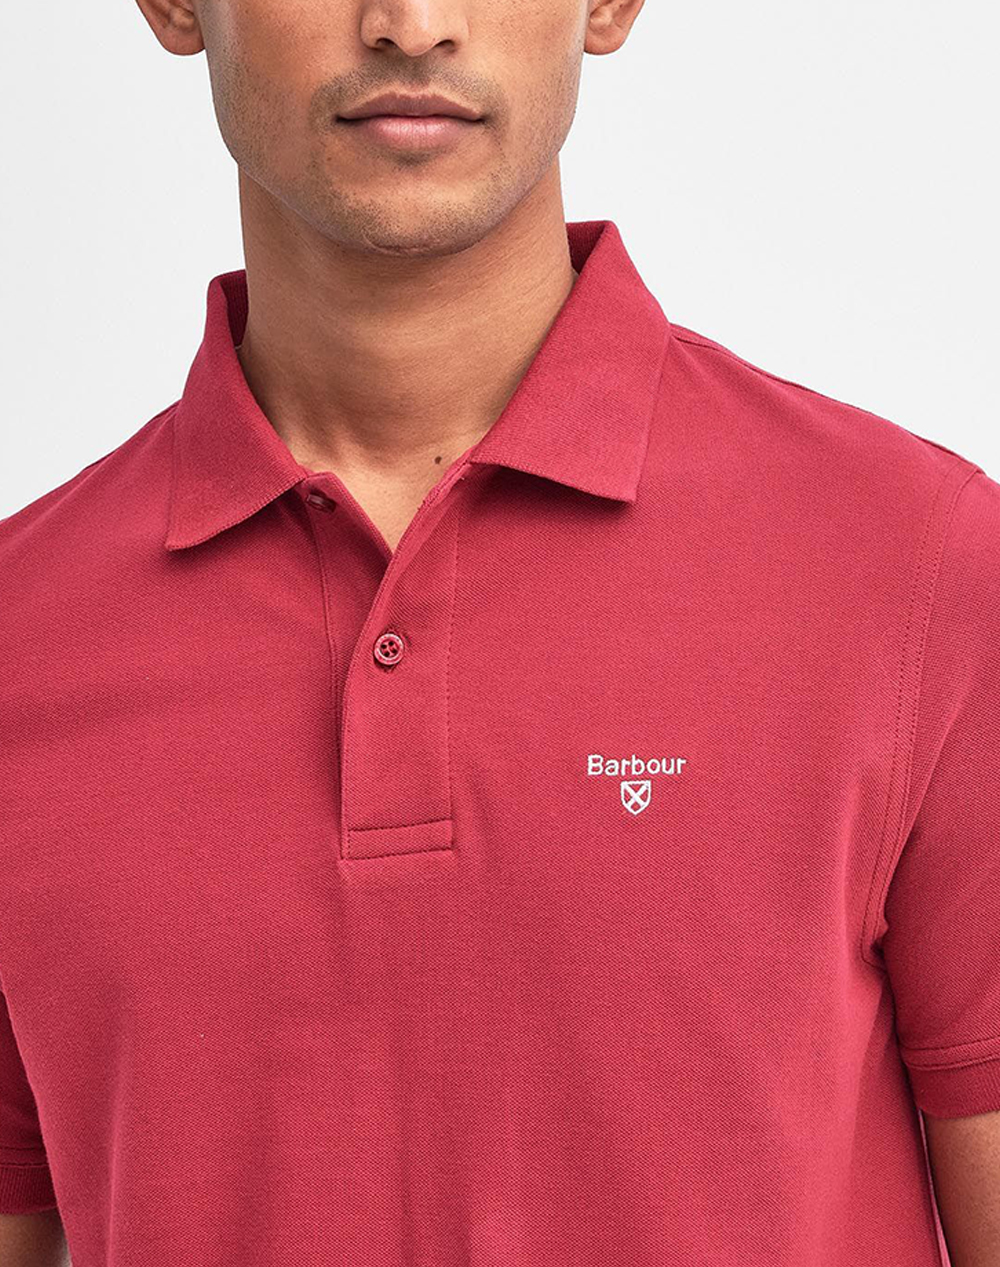 BARBOUR BARBOUR LIGHTWEIGHT SPORTS POLO SHIRT